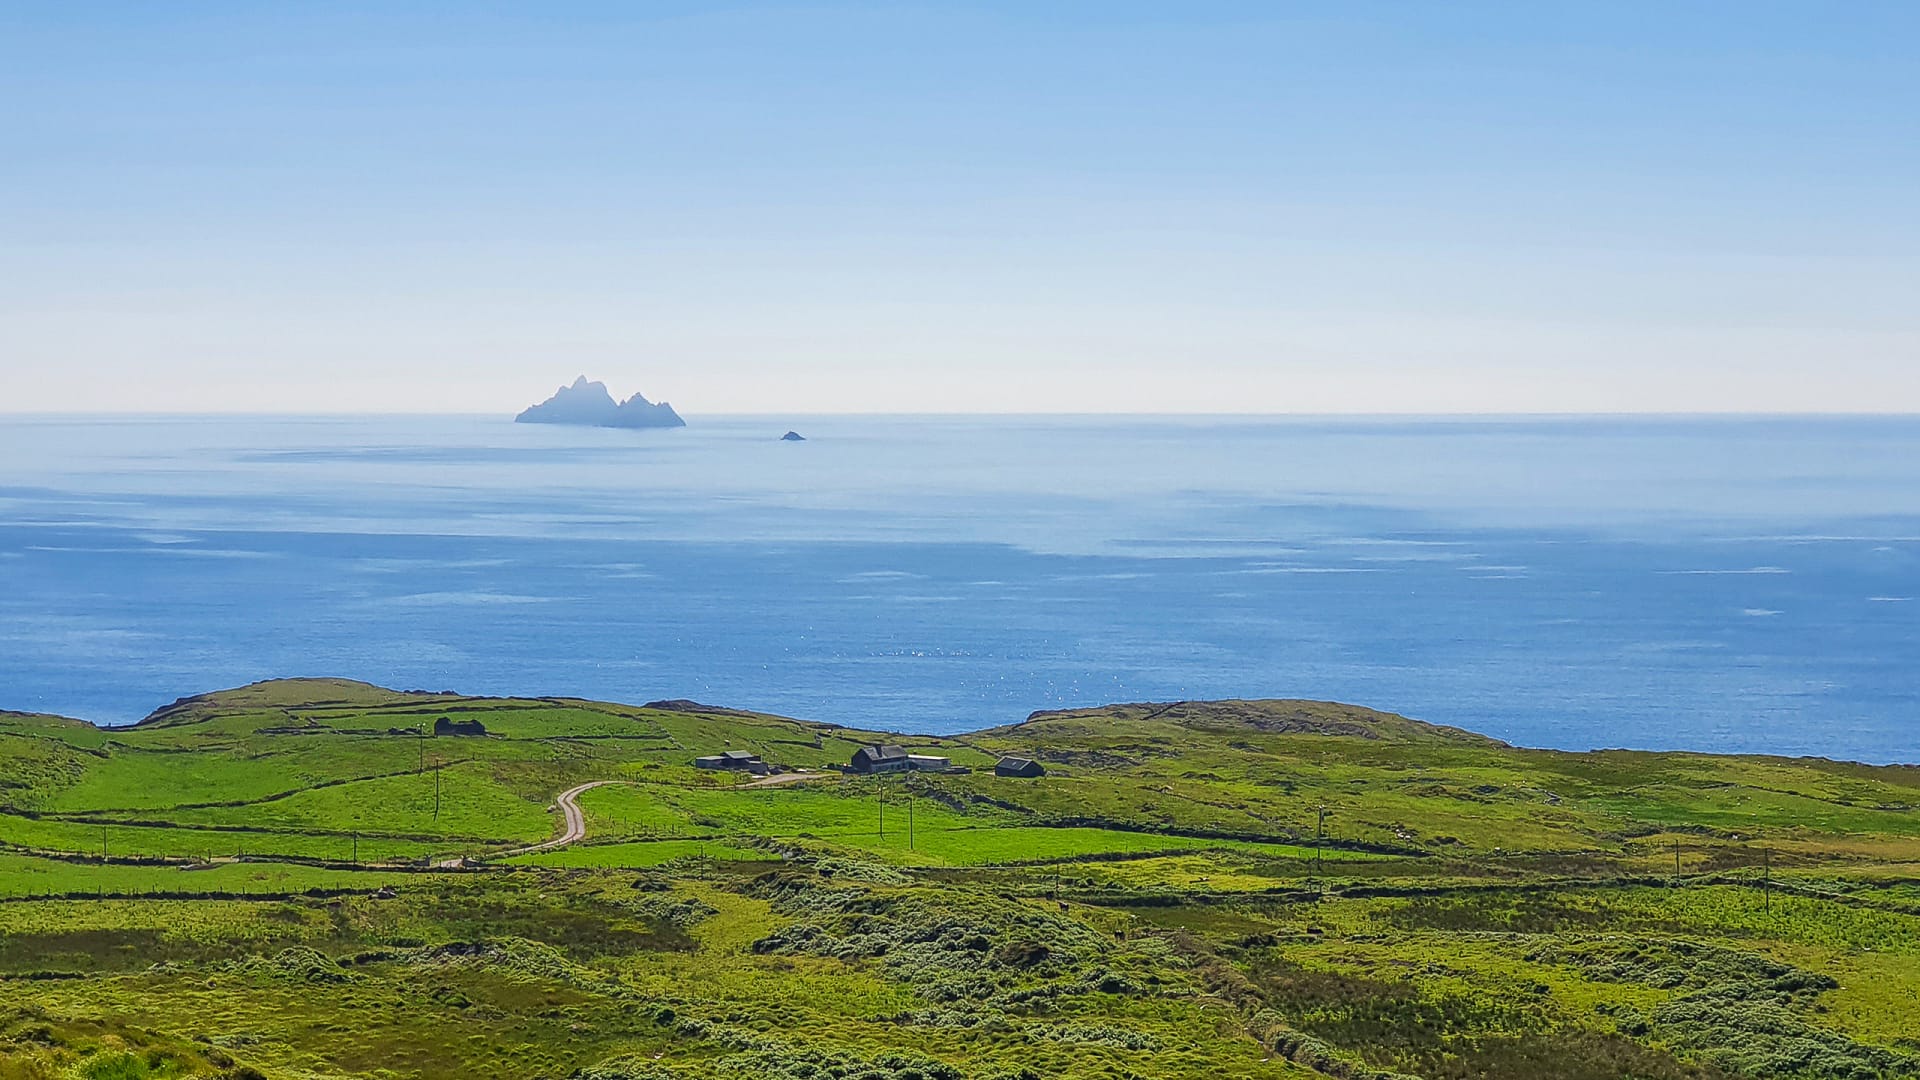 Looking out to the Skellig Islands